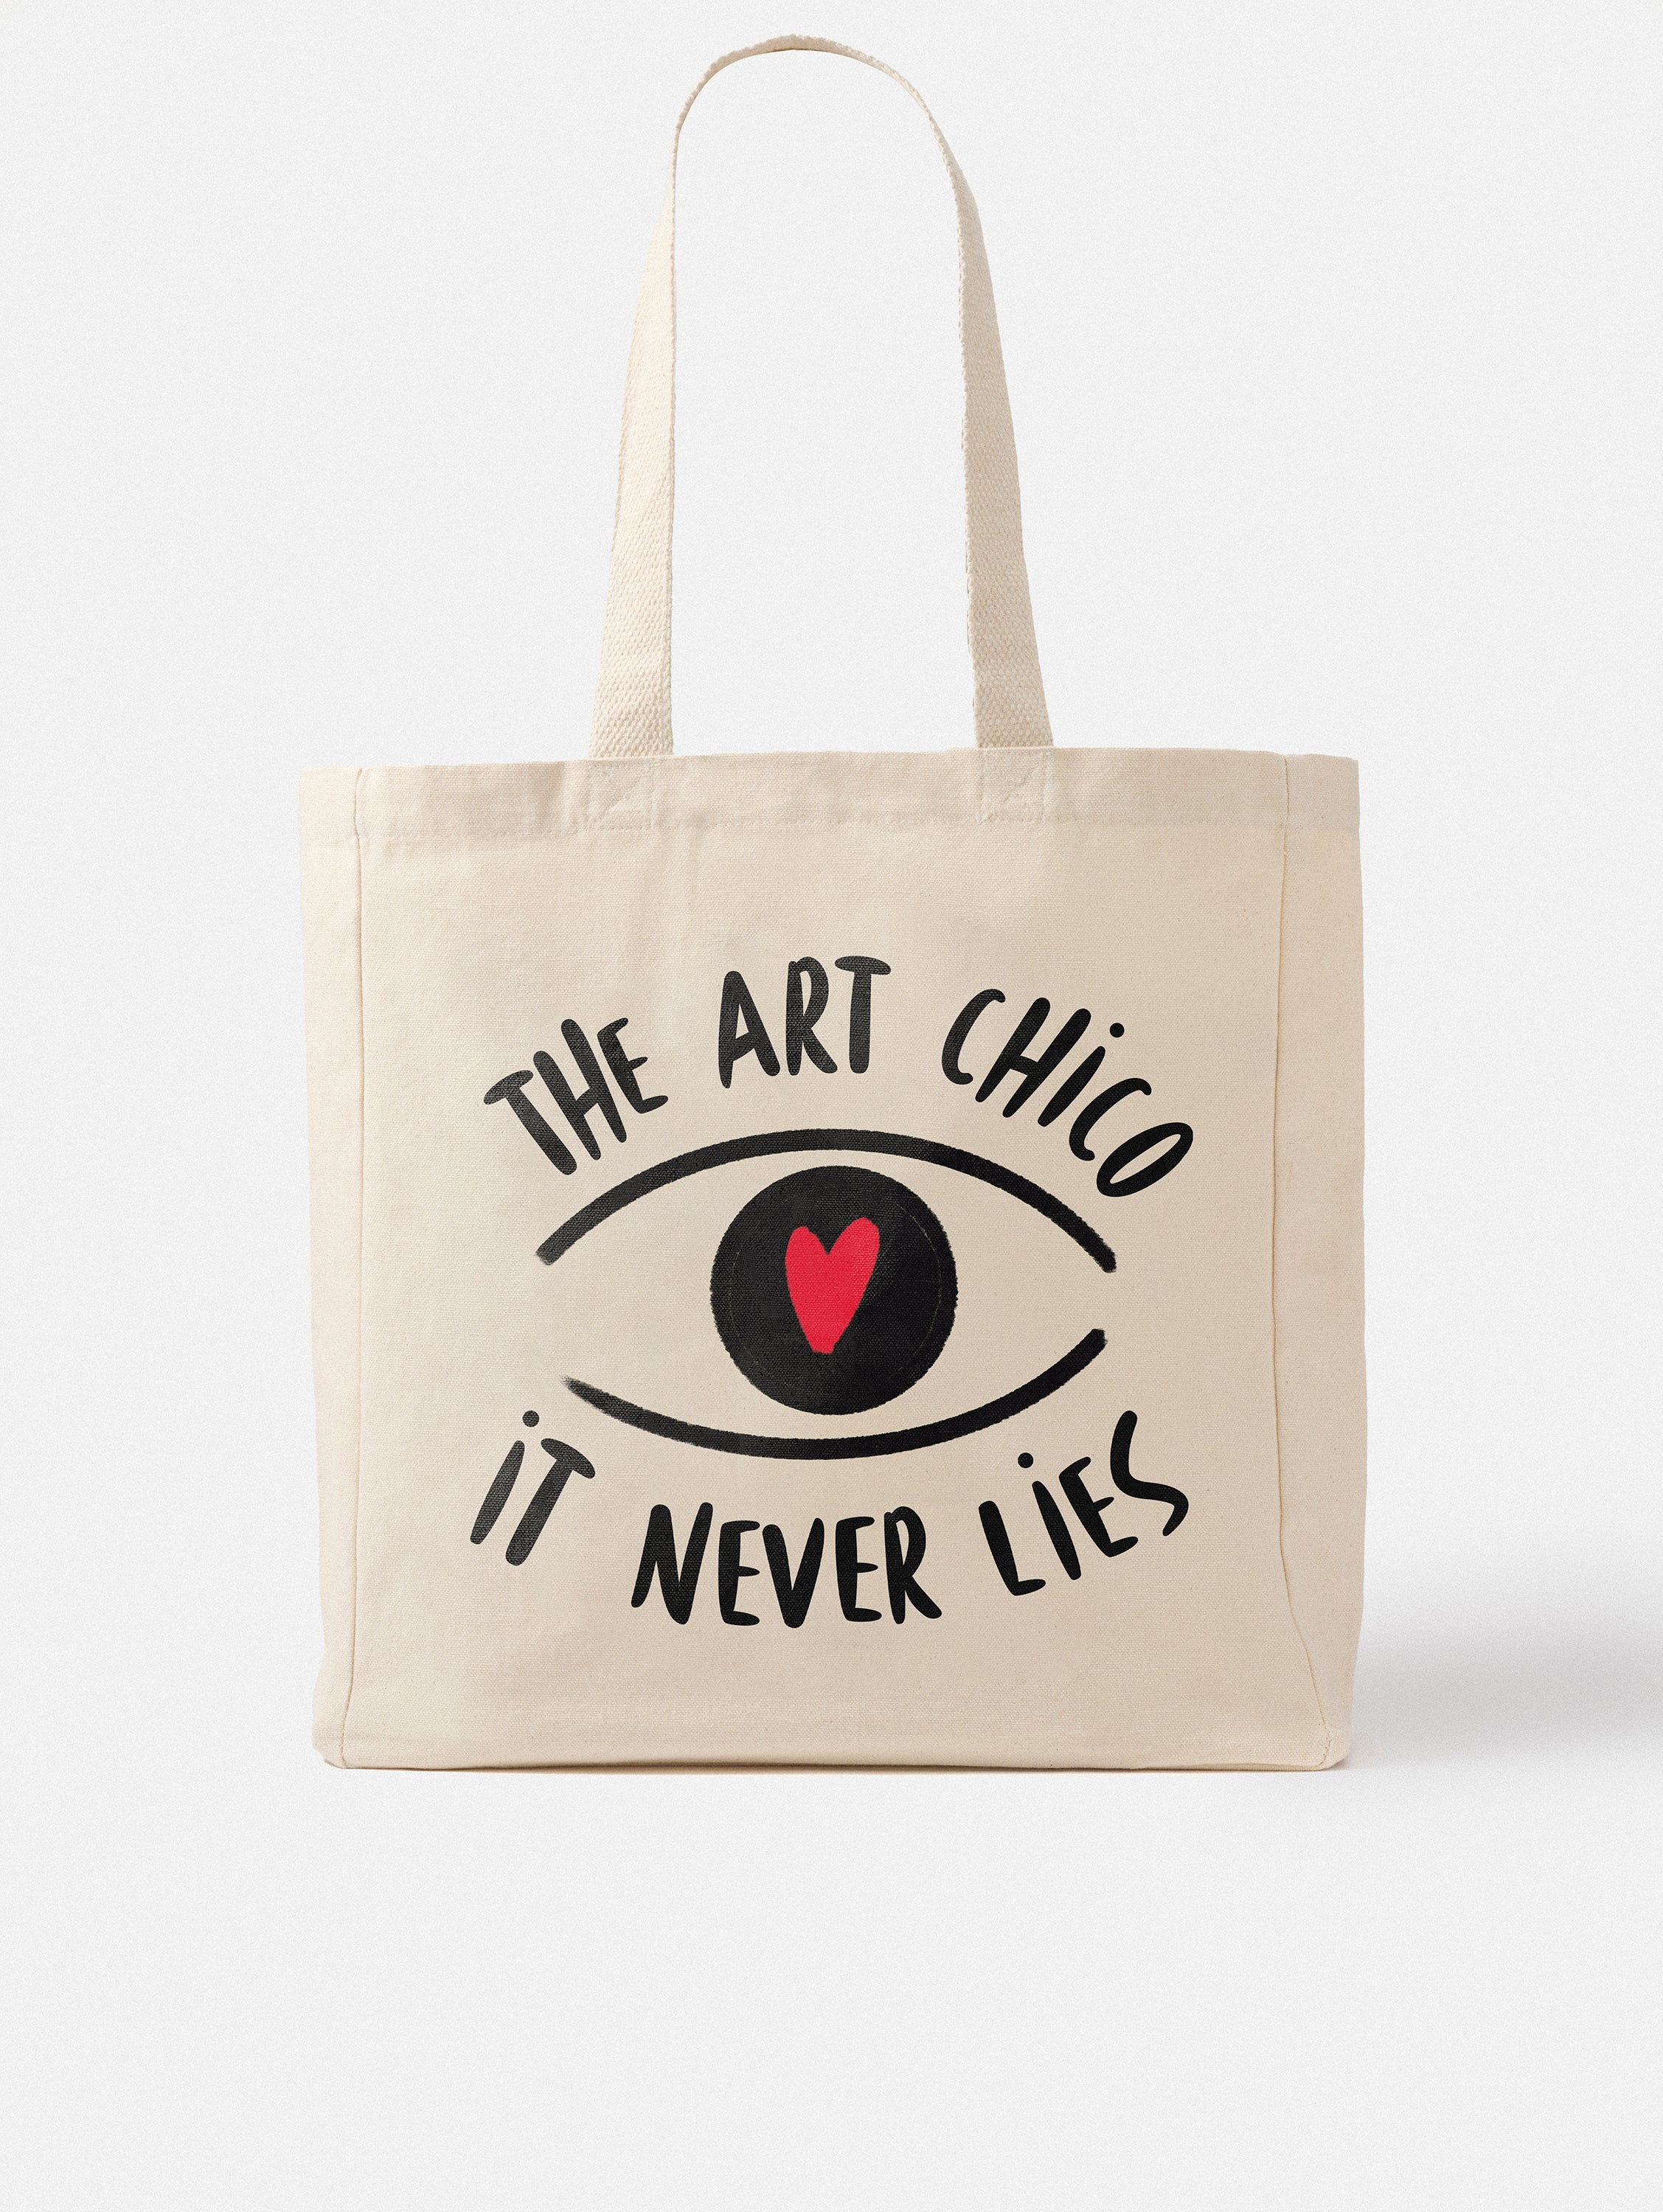 TOTE THE ART CHICO, IT NEVER LIES (VALENTINE'S DAY EDITION)